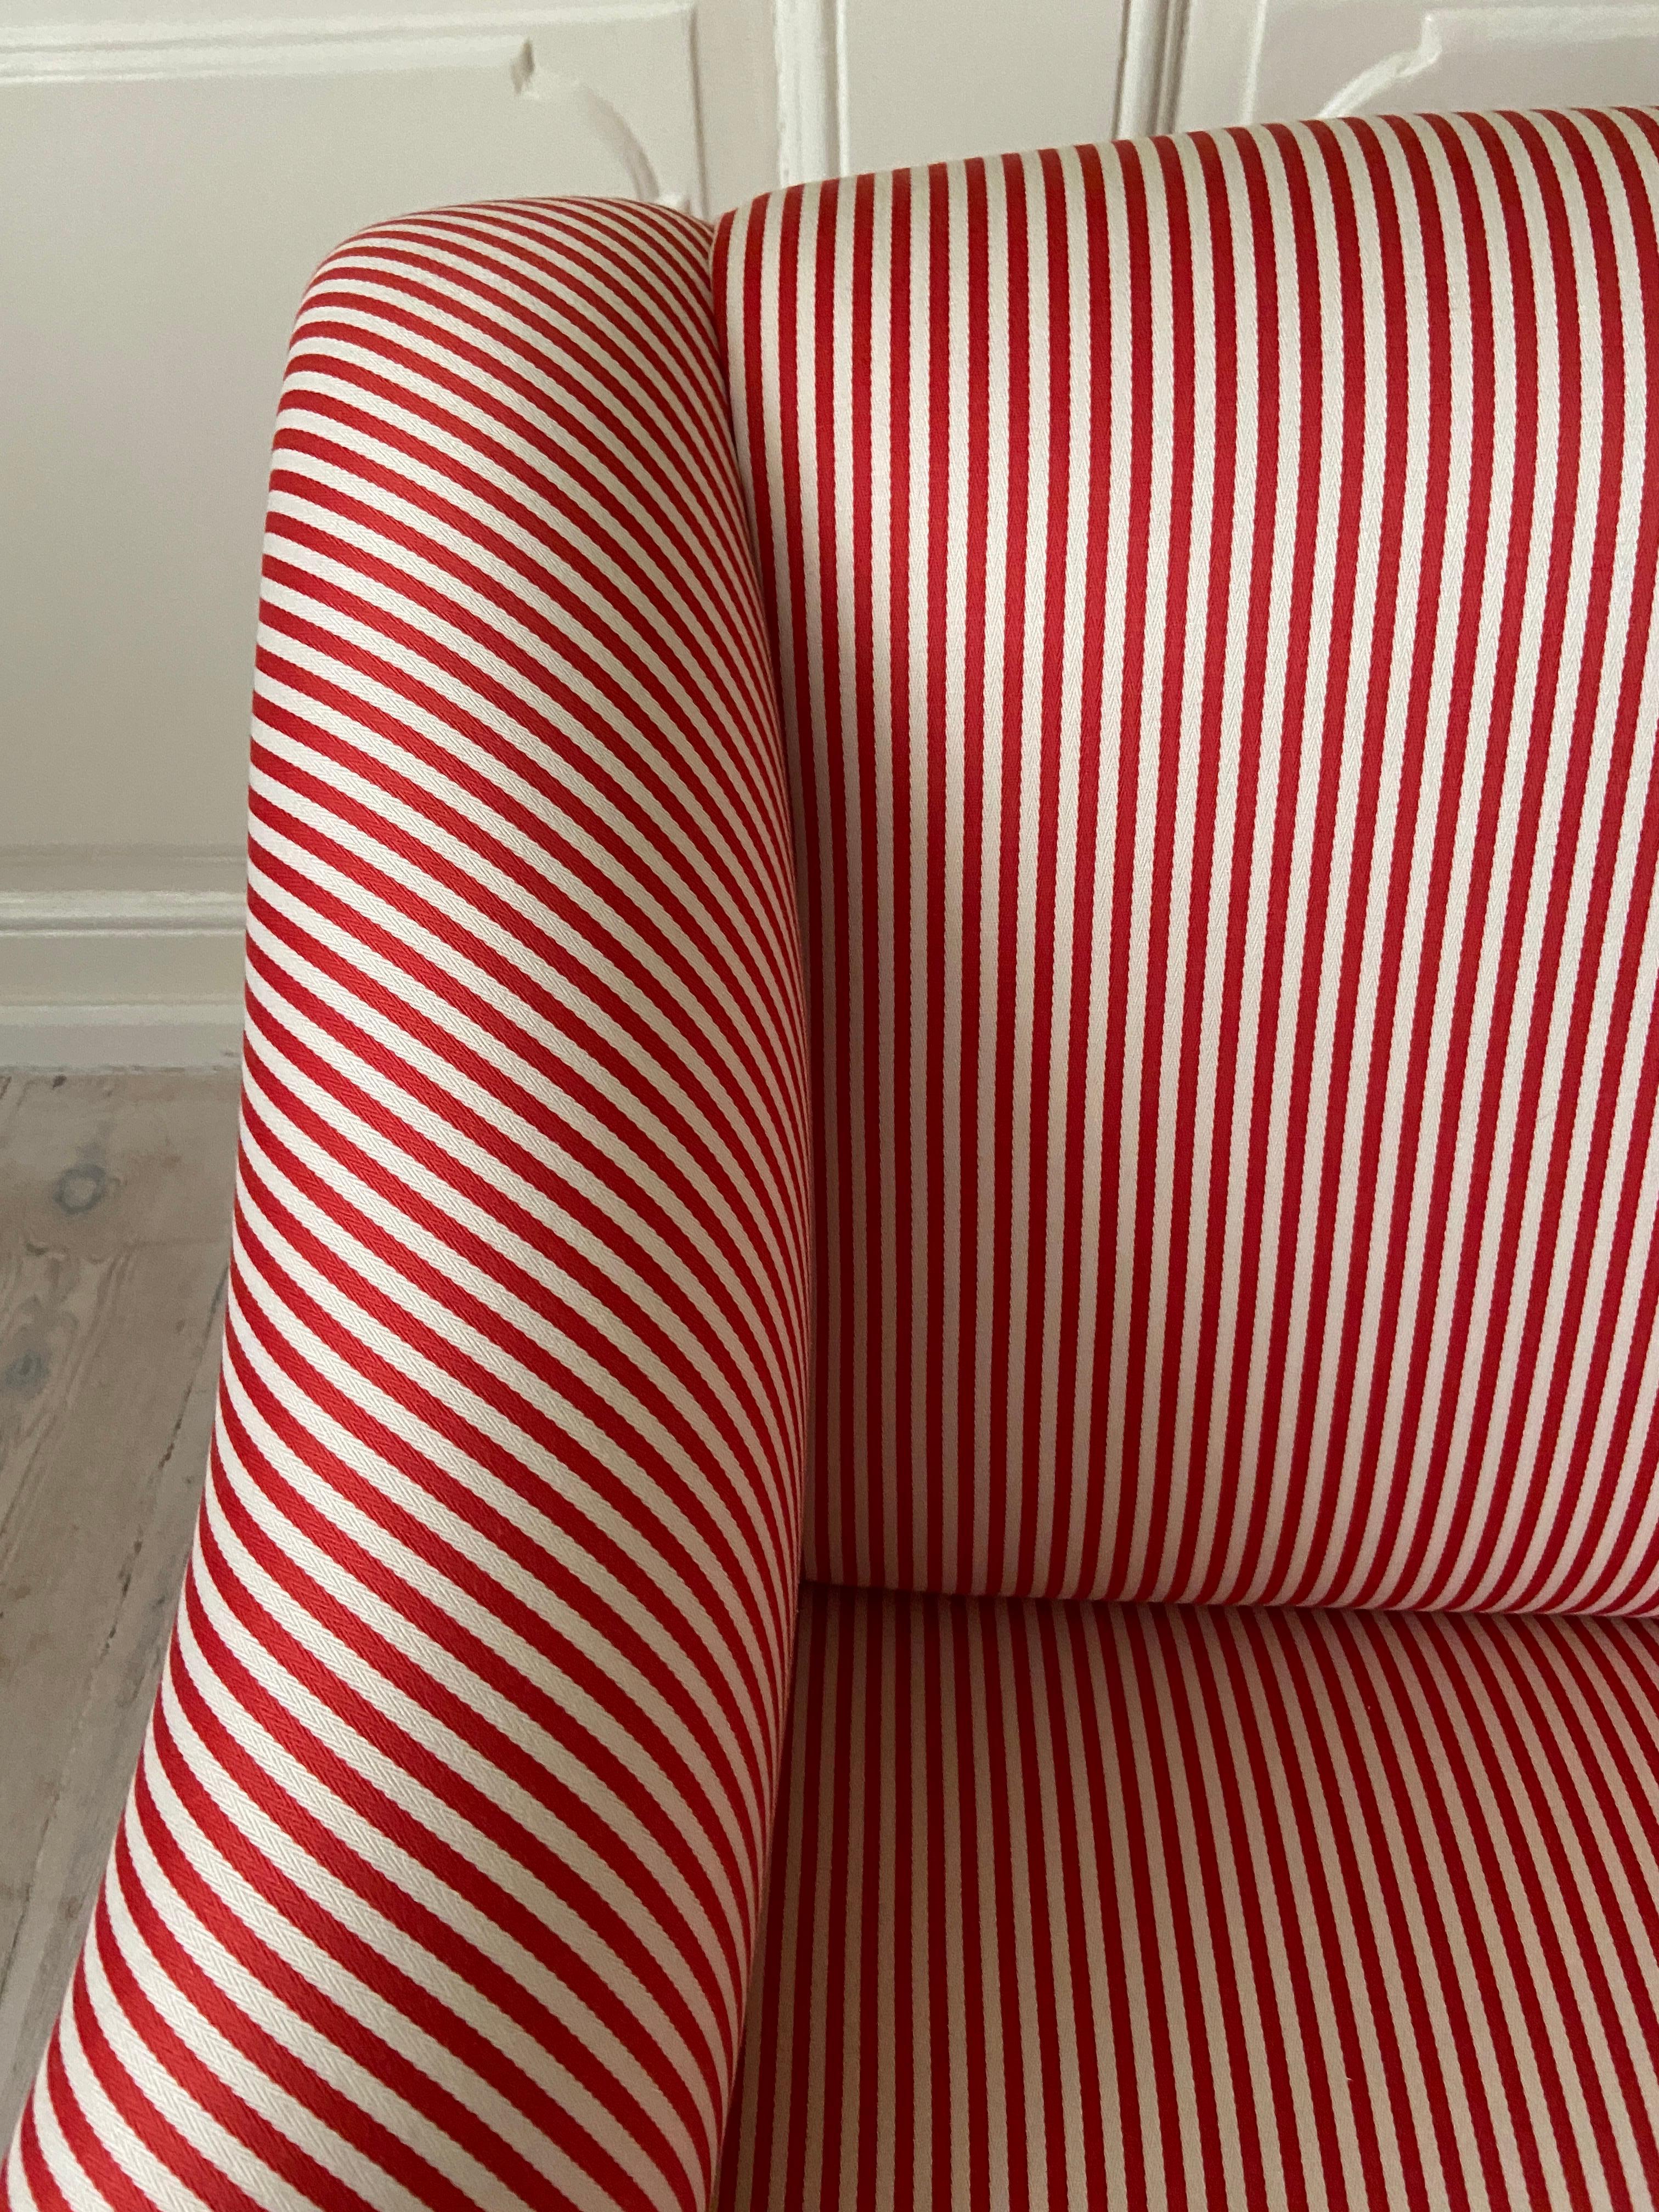 red and white striped sofa